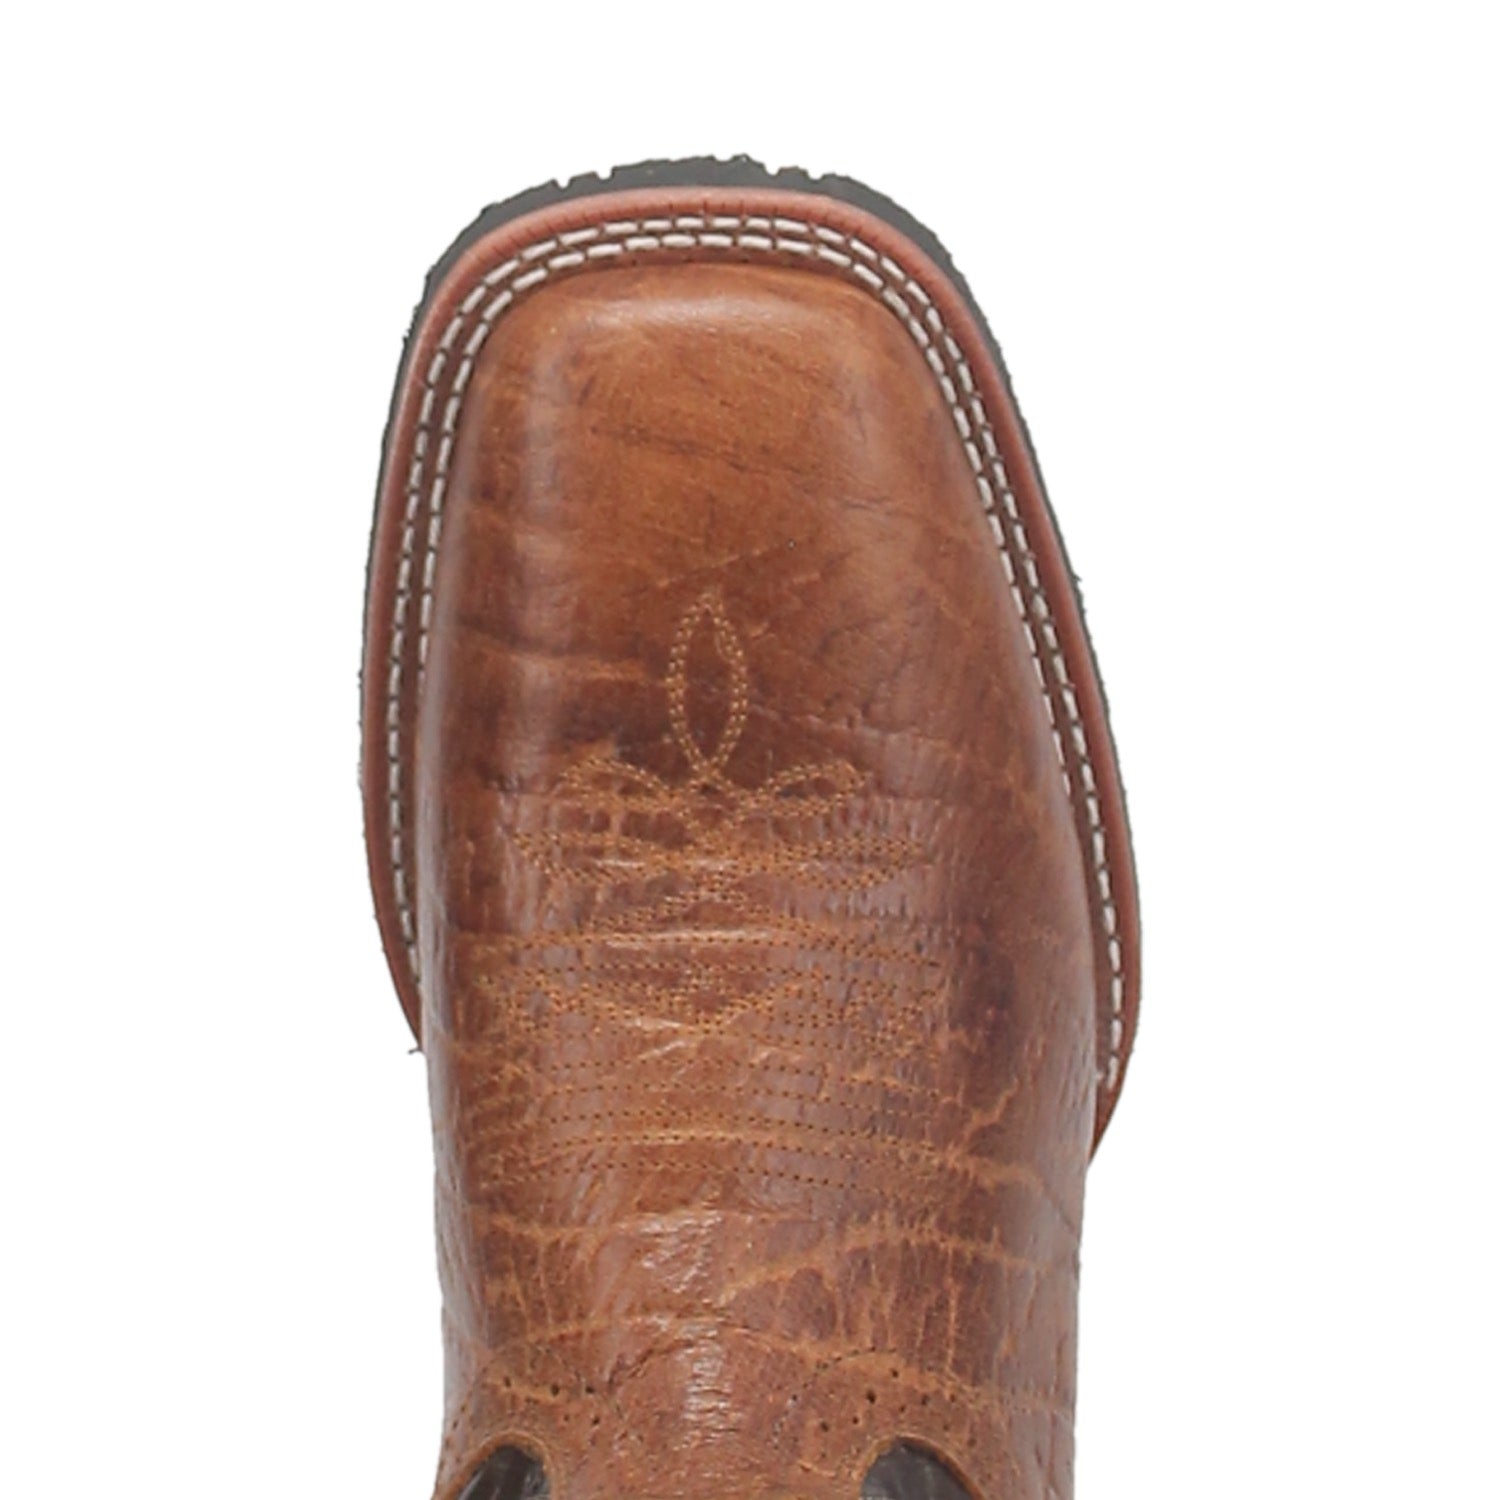 BROKEN BOW LEATHER BOOT Image